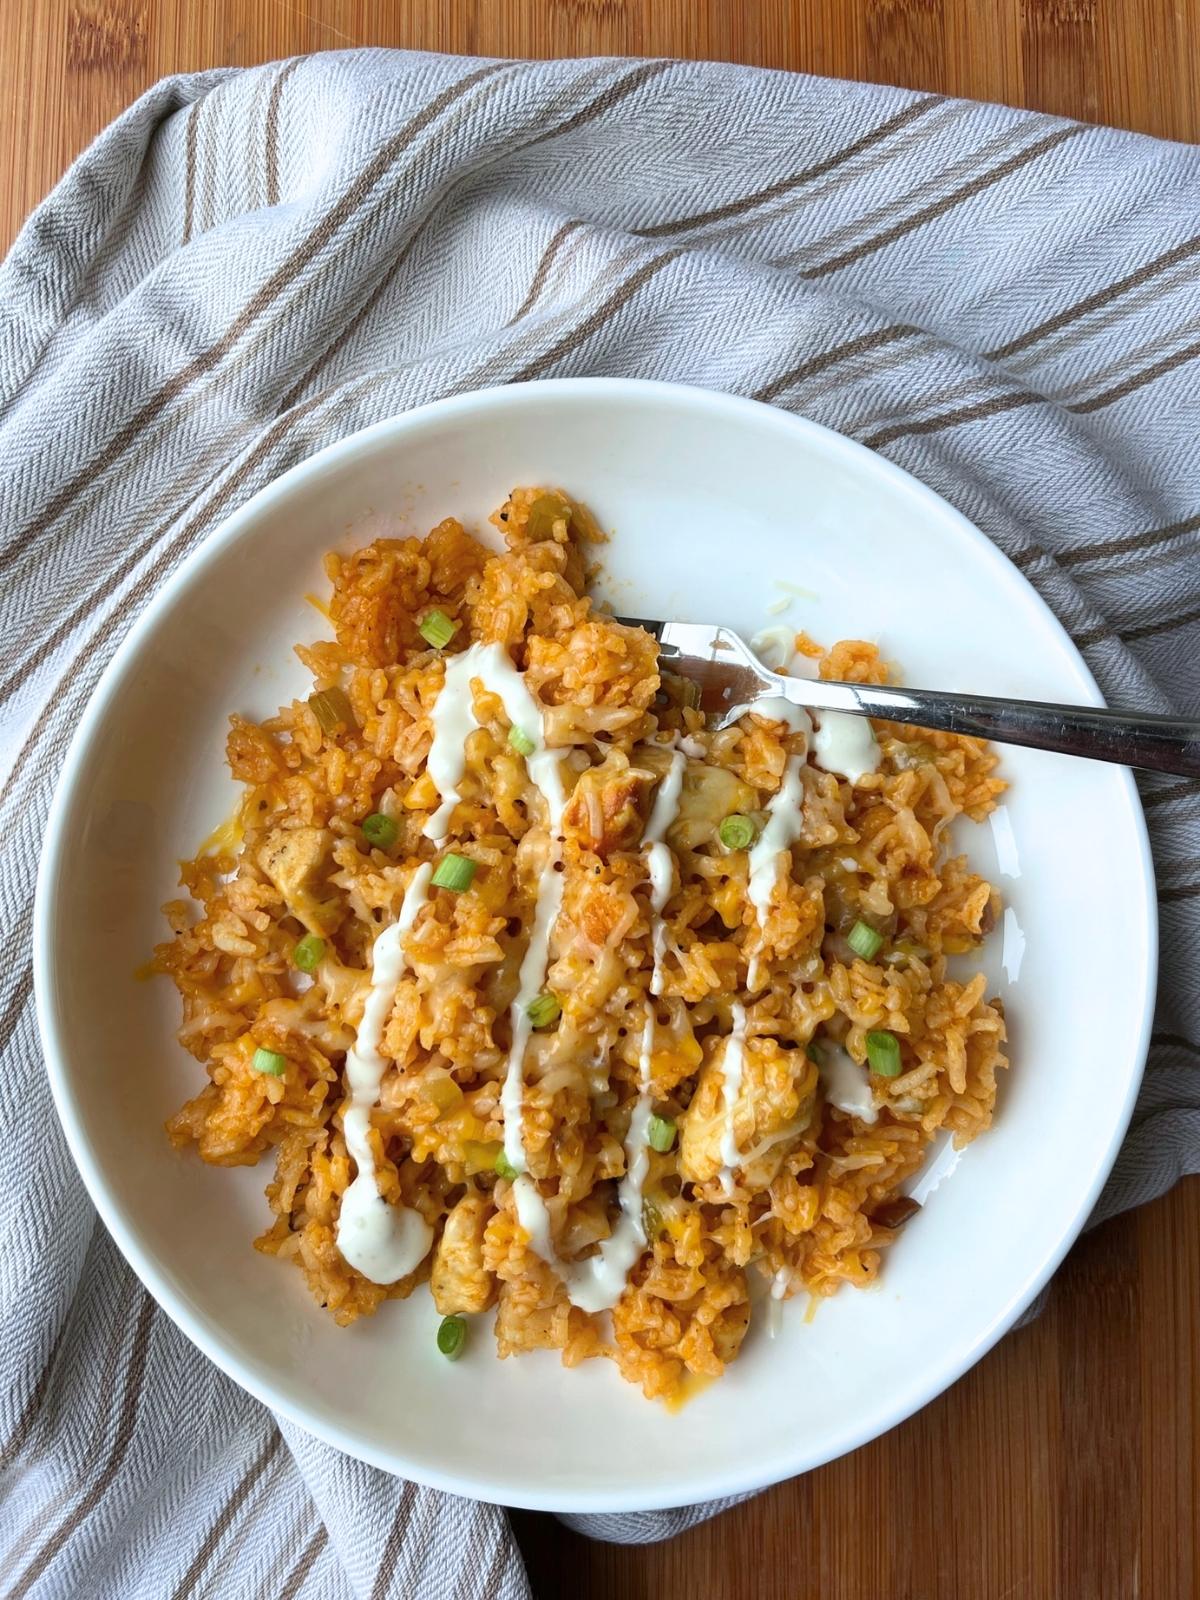 A white bowl holding the complete recipe of buffalo chicken rice. It is garnished with chopped green onions and a drizzle of ranch dressing.